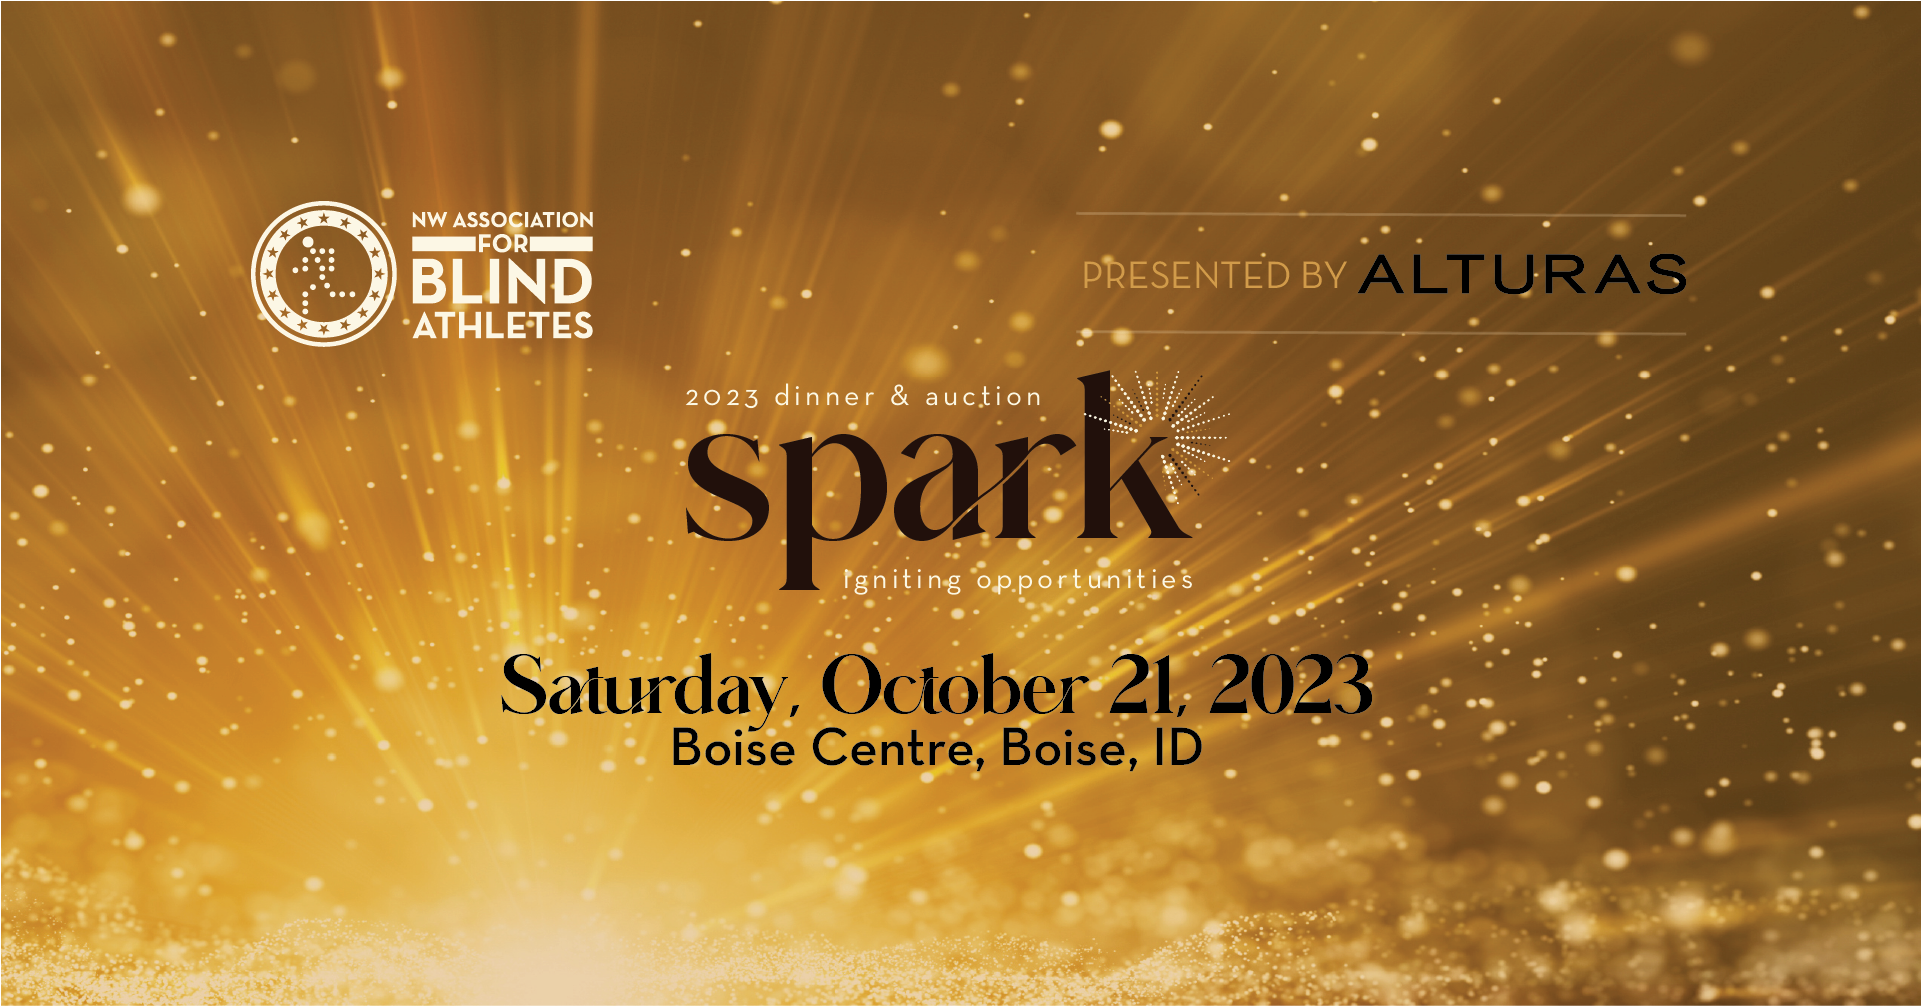 Spark Dinner & Auction Idaho, Saturday October 21, 2023 at the Boise Centre. Visit www.nwaba.org/sparkid for tickets.